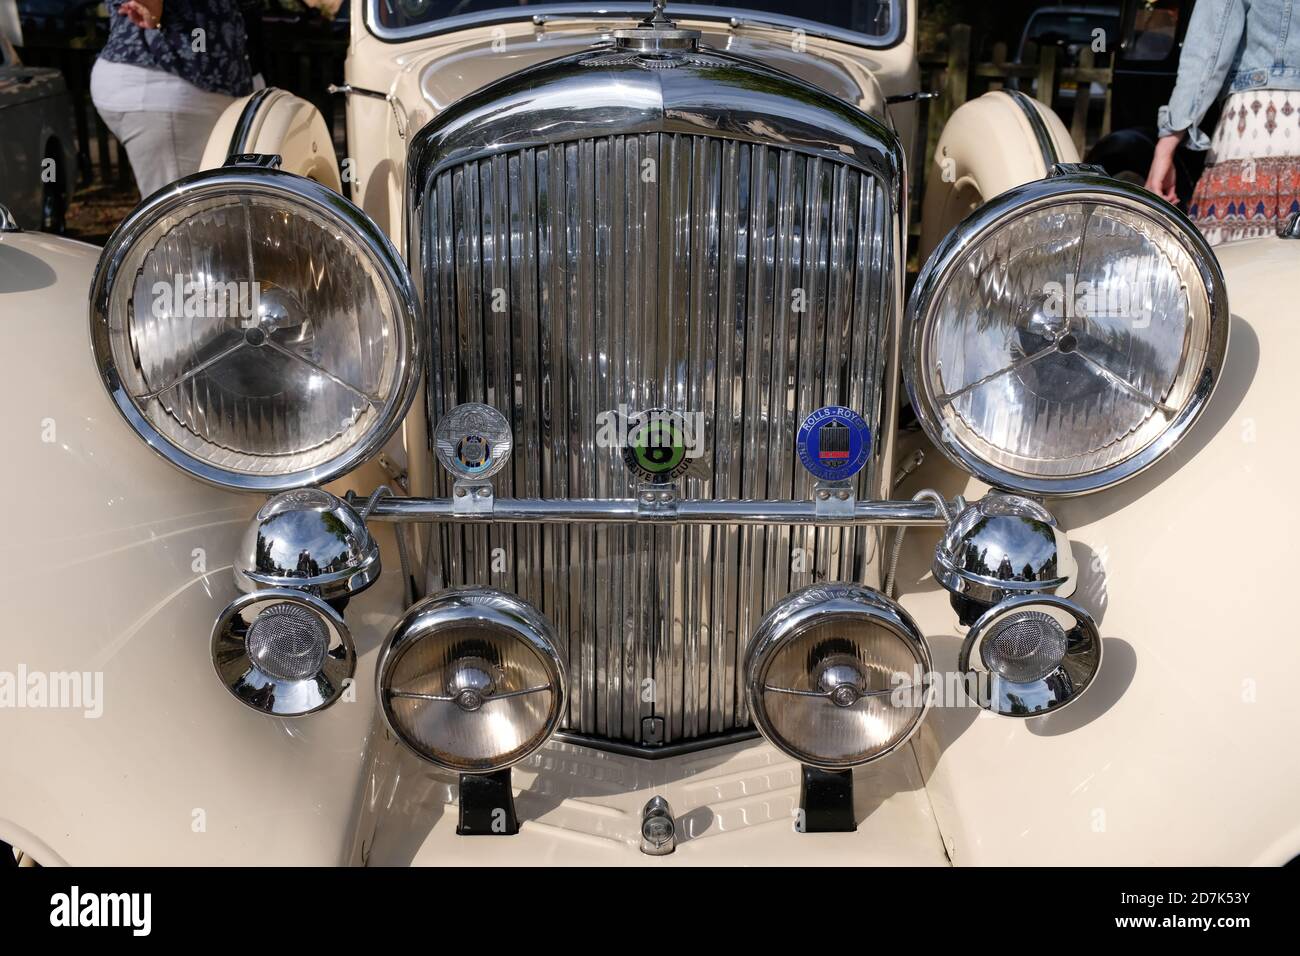 close up of 1930s Bentley car chrome radiator grill with headlamps, horns and badge bar against cars cream bodywork. Concourse condition. Stock Photo